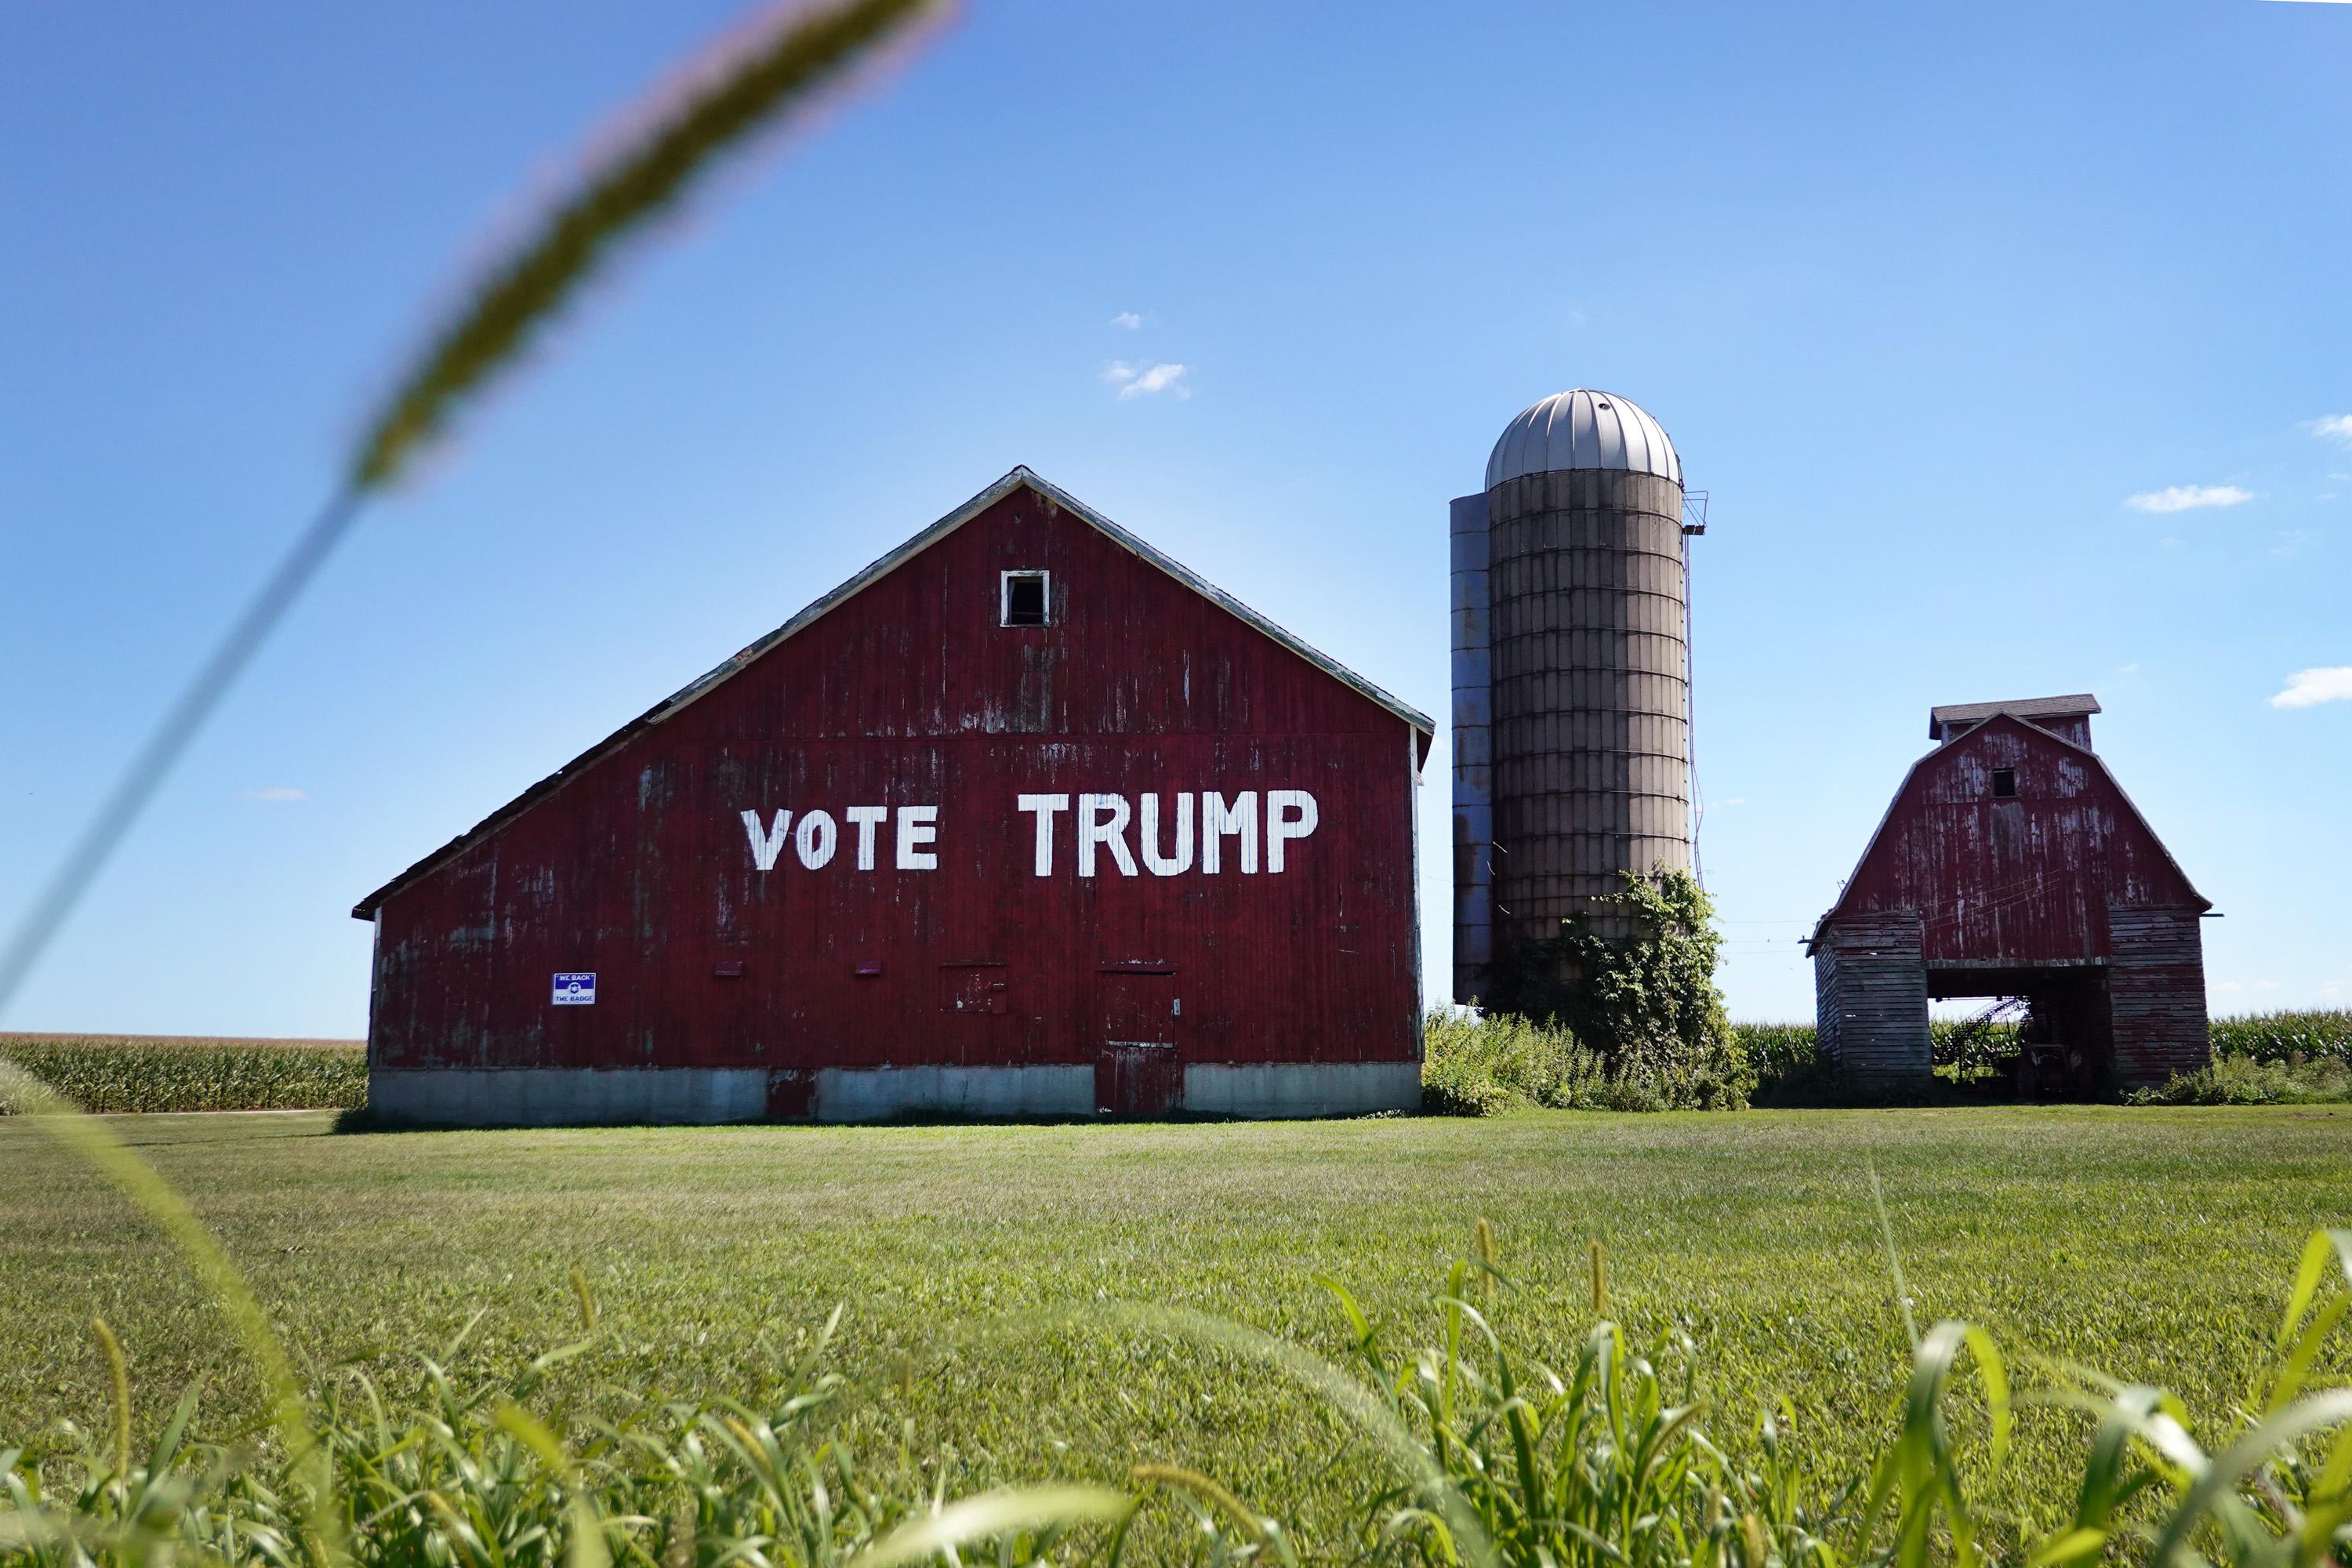 A red barn with "Vote Trump" painted on it near Clinton, Wisconsin. The barn stands next to a silo amid green grass on a sunny day.